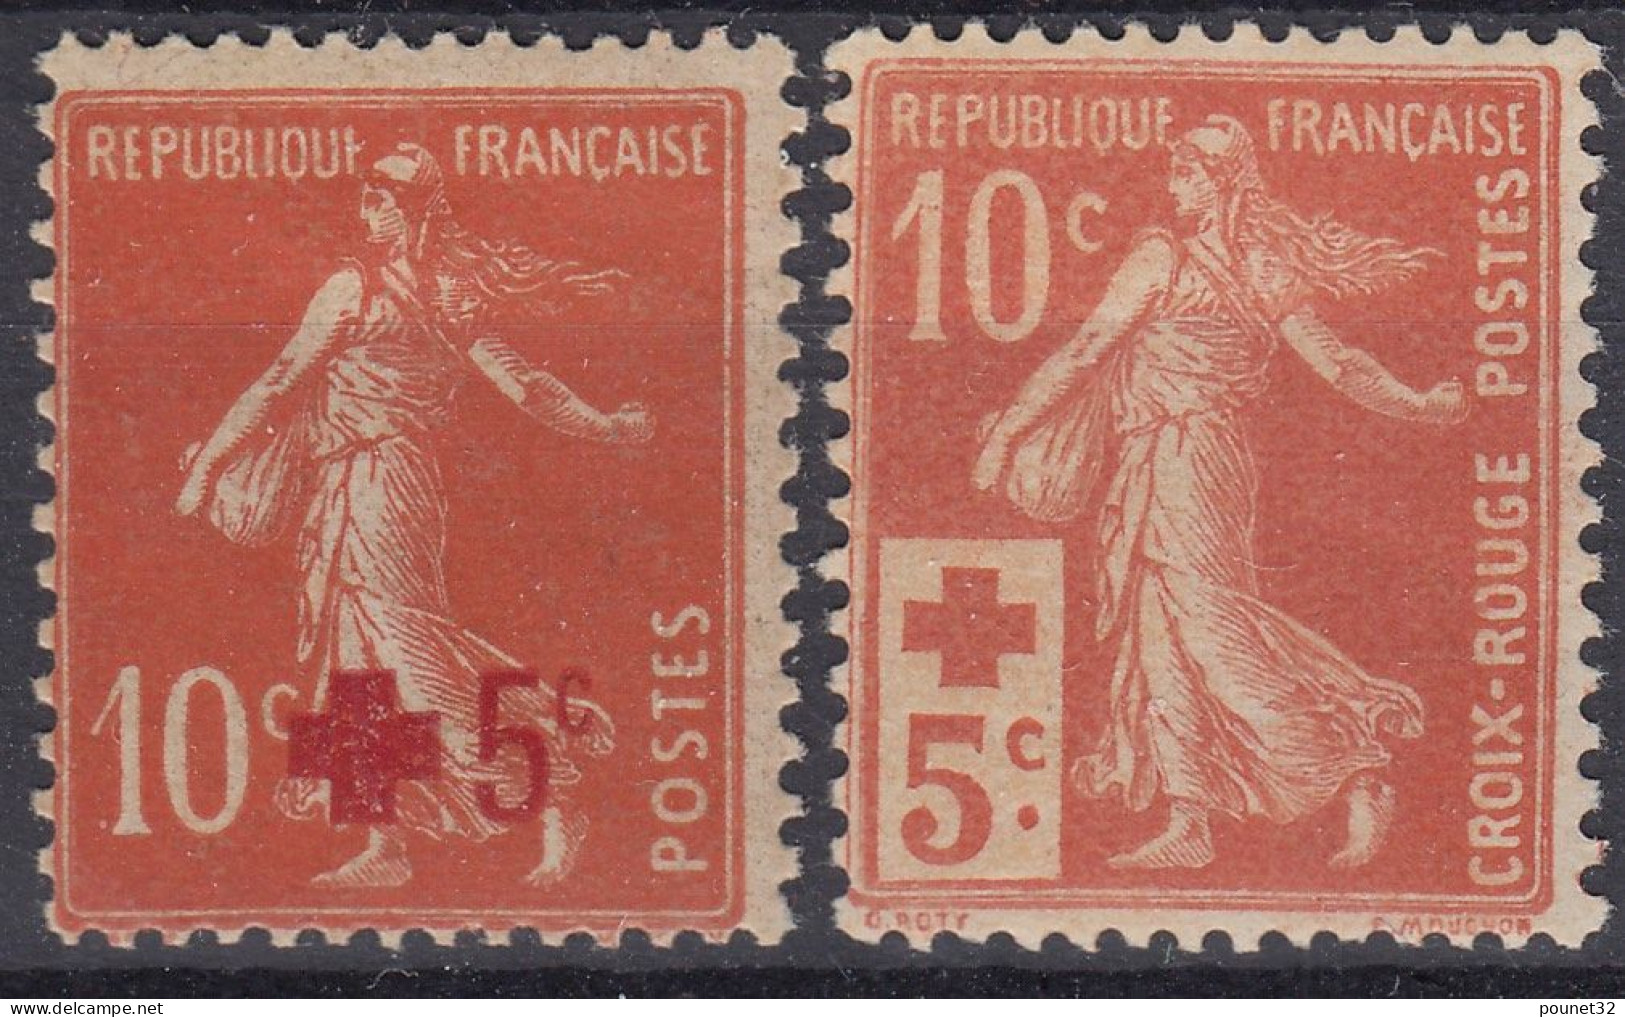 TIMBRE FRANCE SEMEUSE CROIX ROUGE N° 146/147 NEUFS * GOMME TRACE DE CHARNIERE - 1906-38 Sower - Cameo